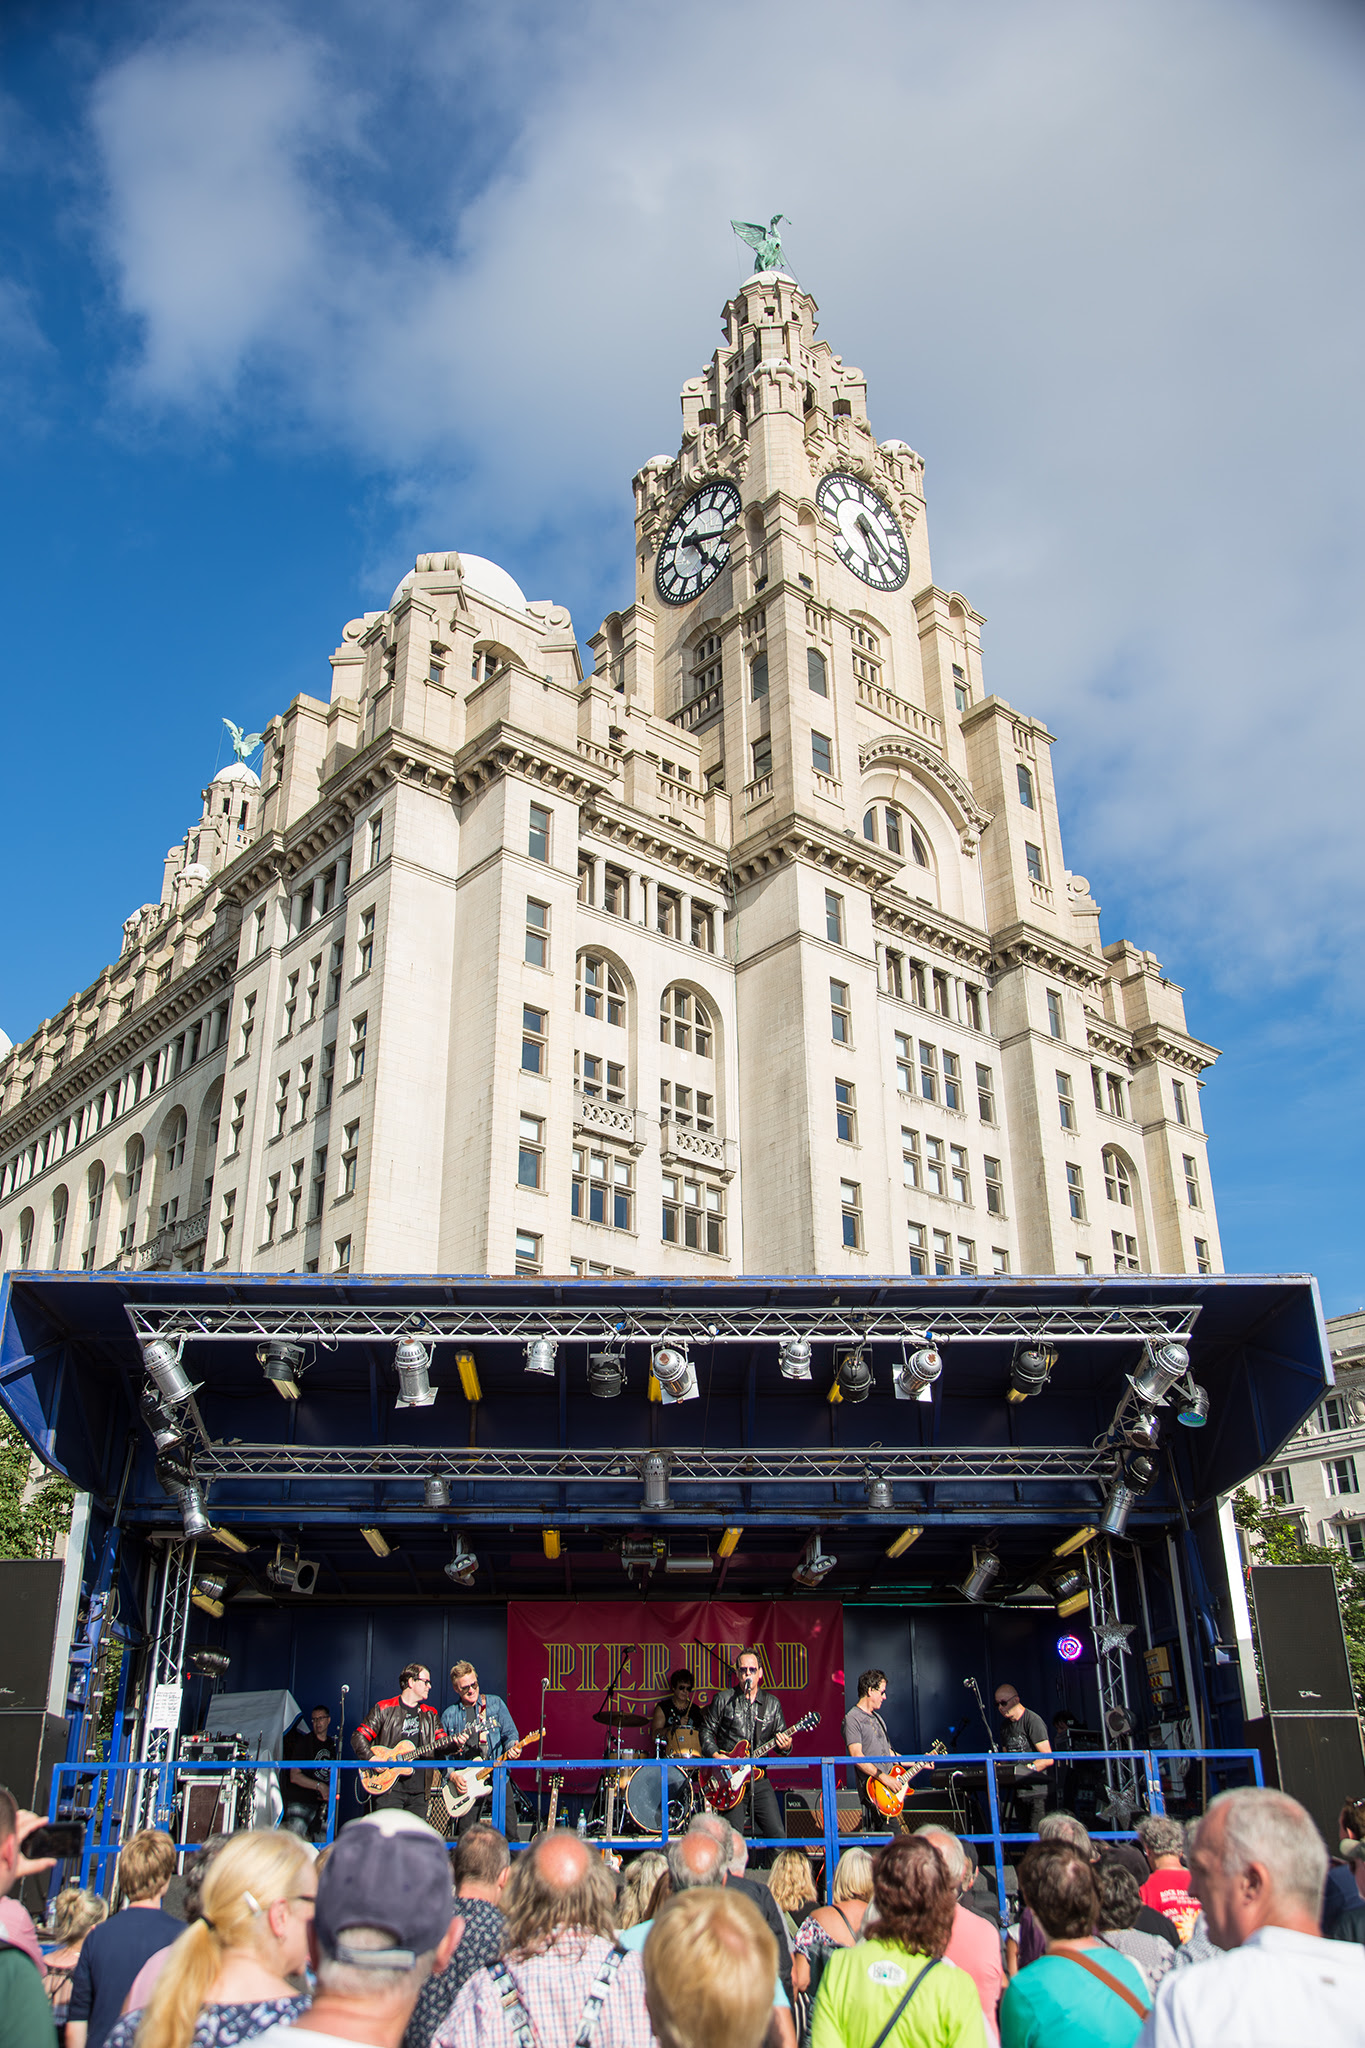 Stage at the Pier head with a Liver building backdrop